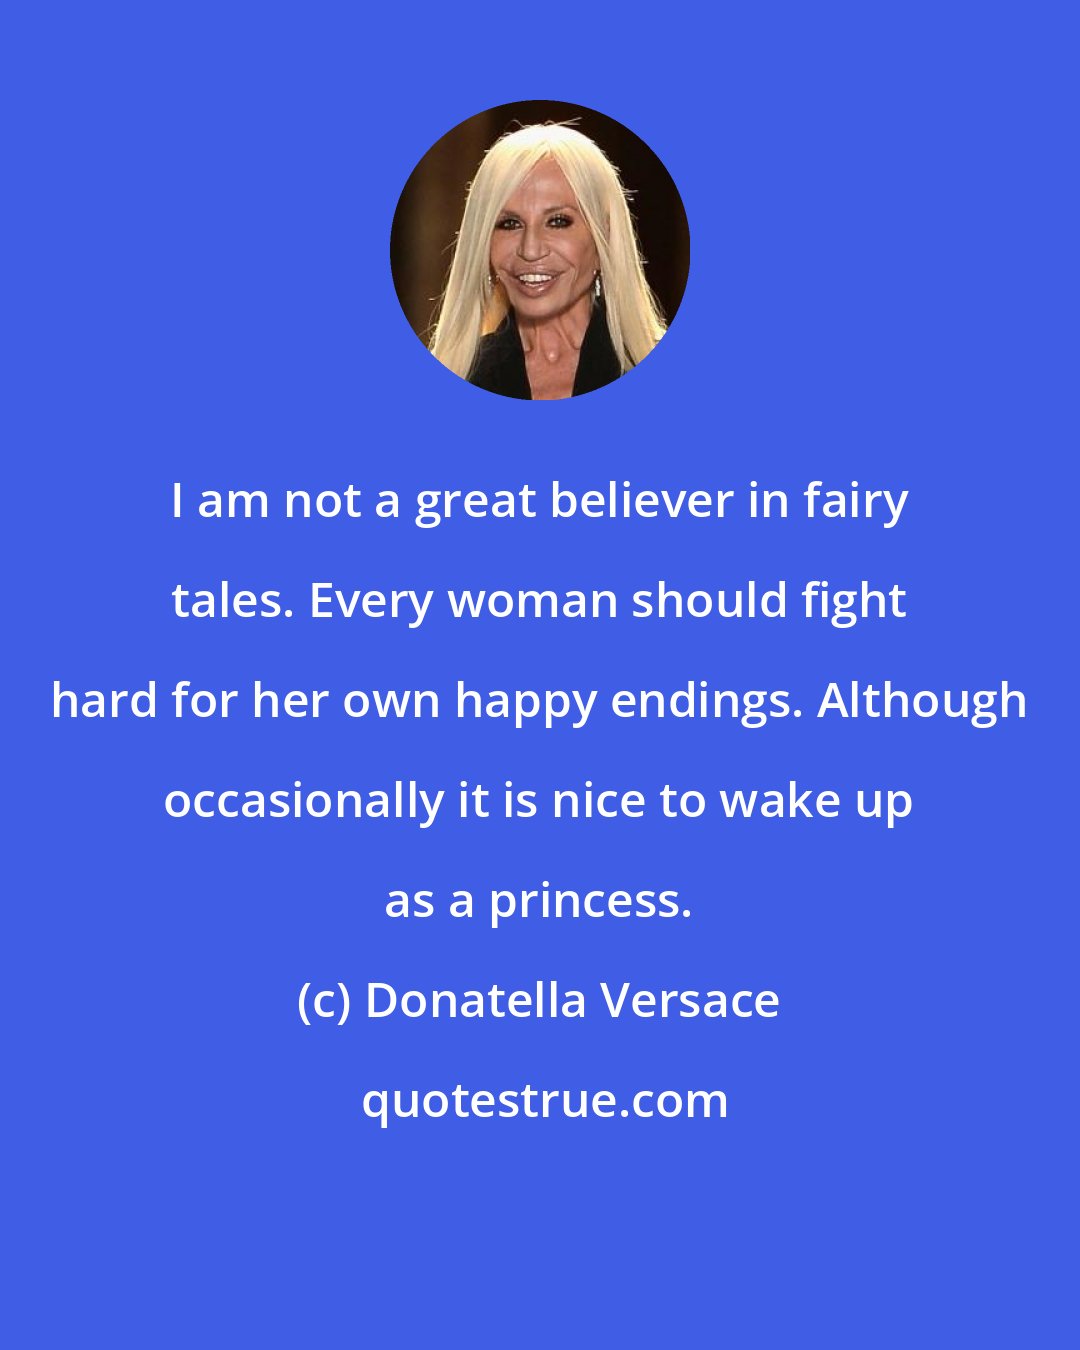 Donatella Versace: I am not a great believer in fairy tales. Every woman should fight hard for her own happy endings. Although occasionally it is nice to wake up as a princess.